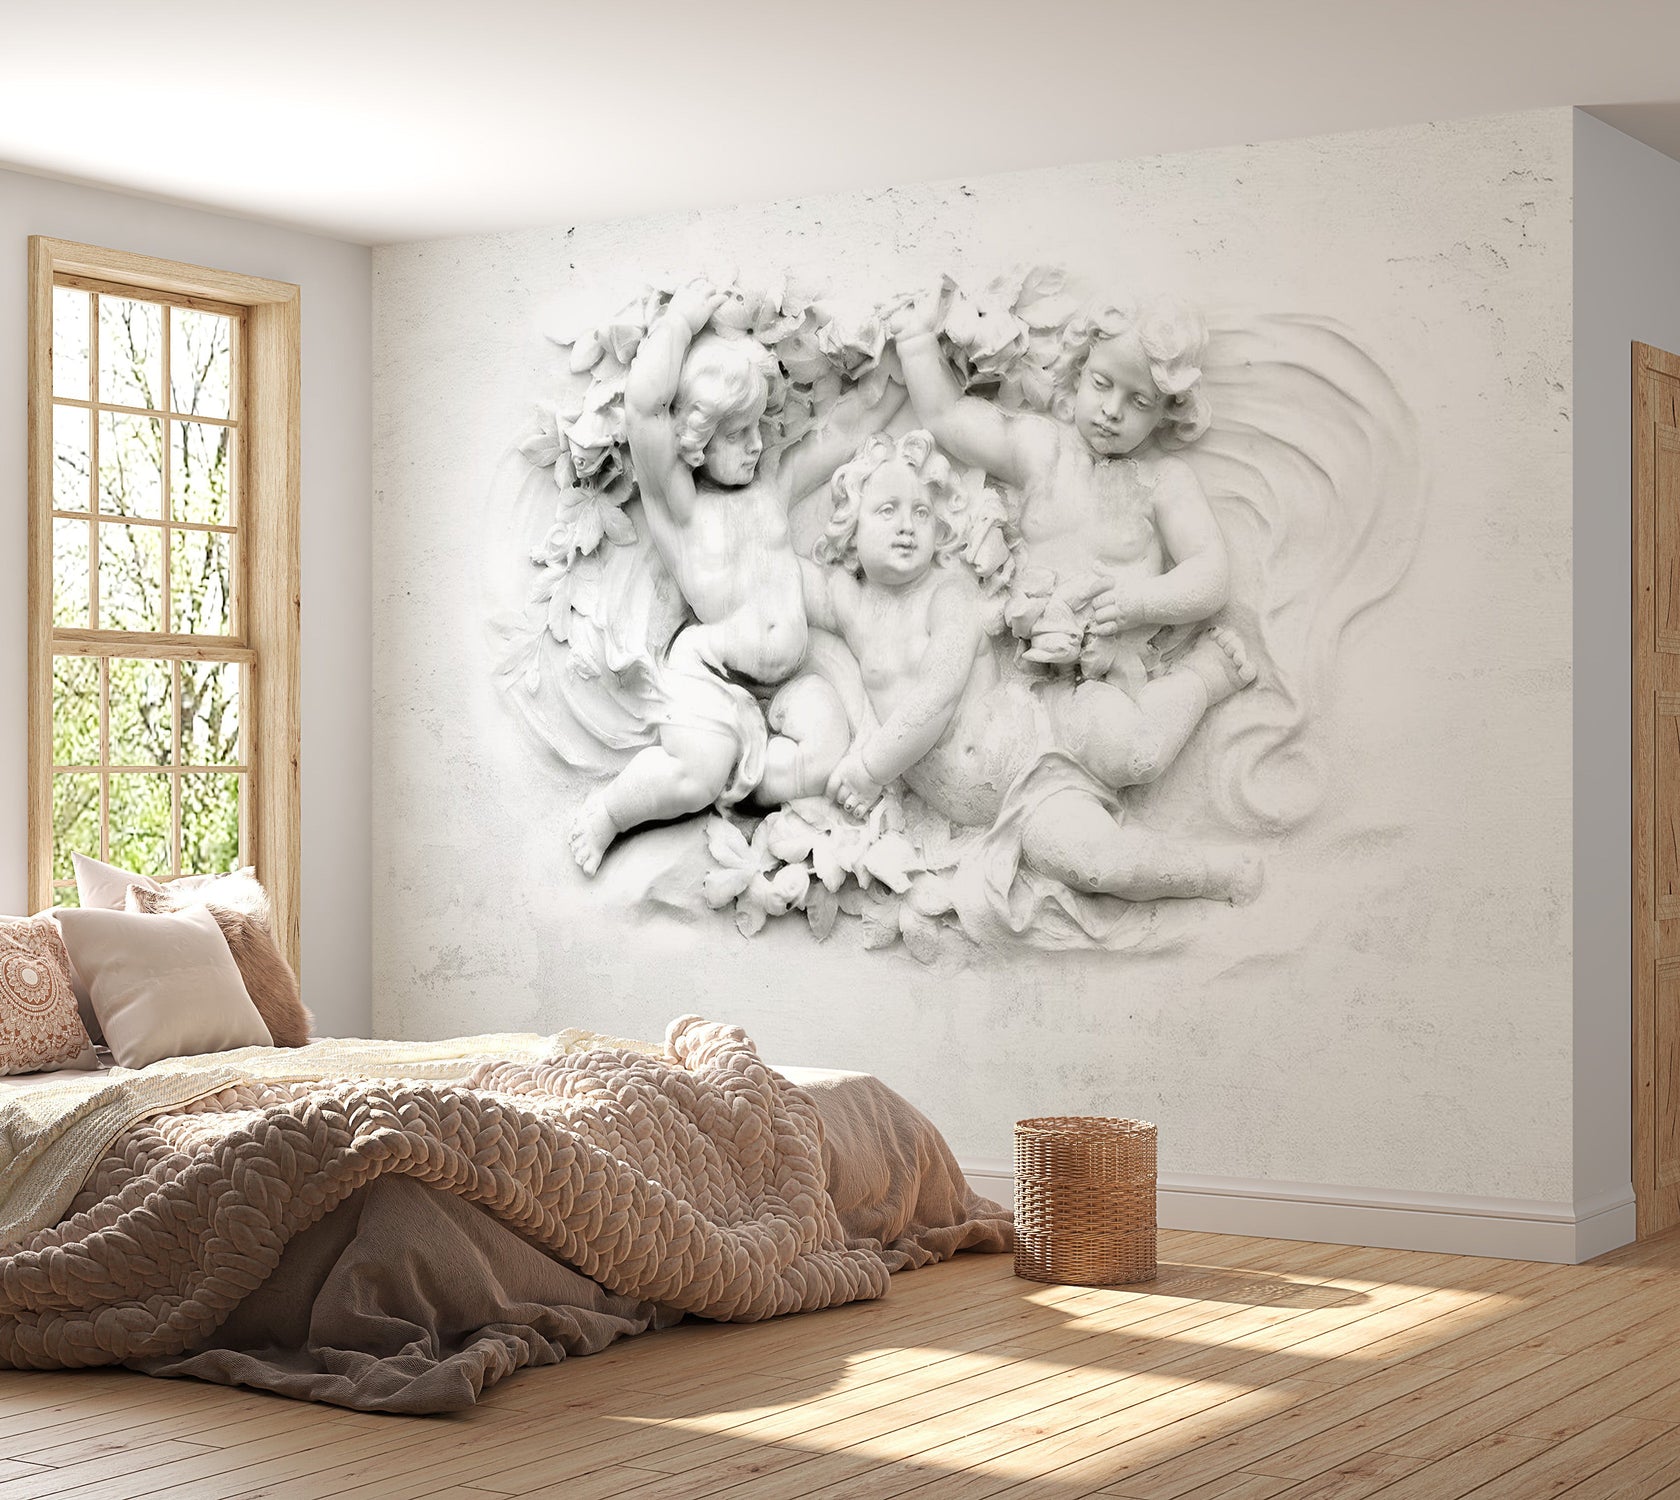 Peel & Stick Wall Mural - Angels Wall Sculpture - Removable Wall Decals